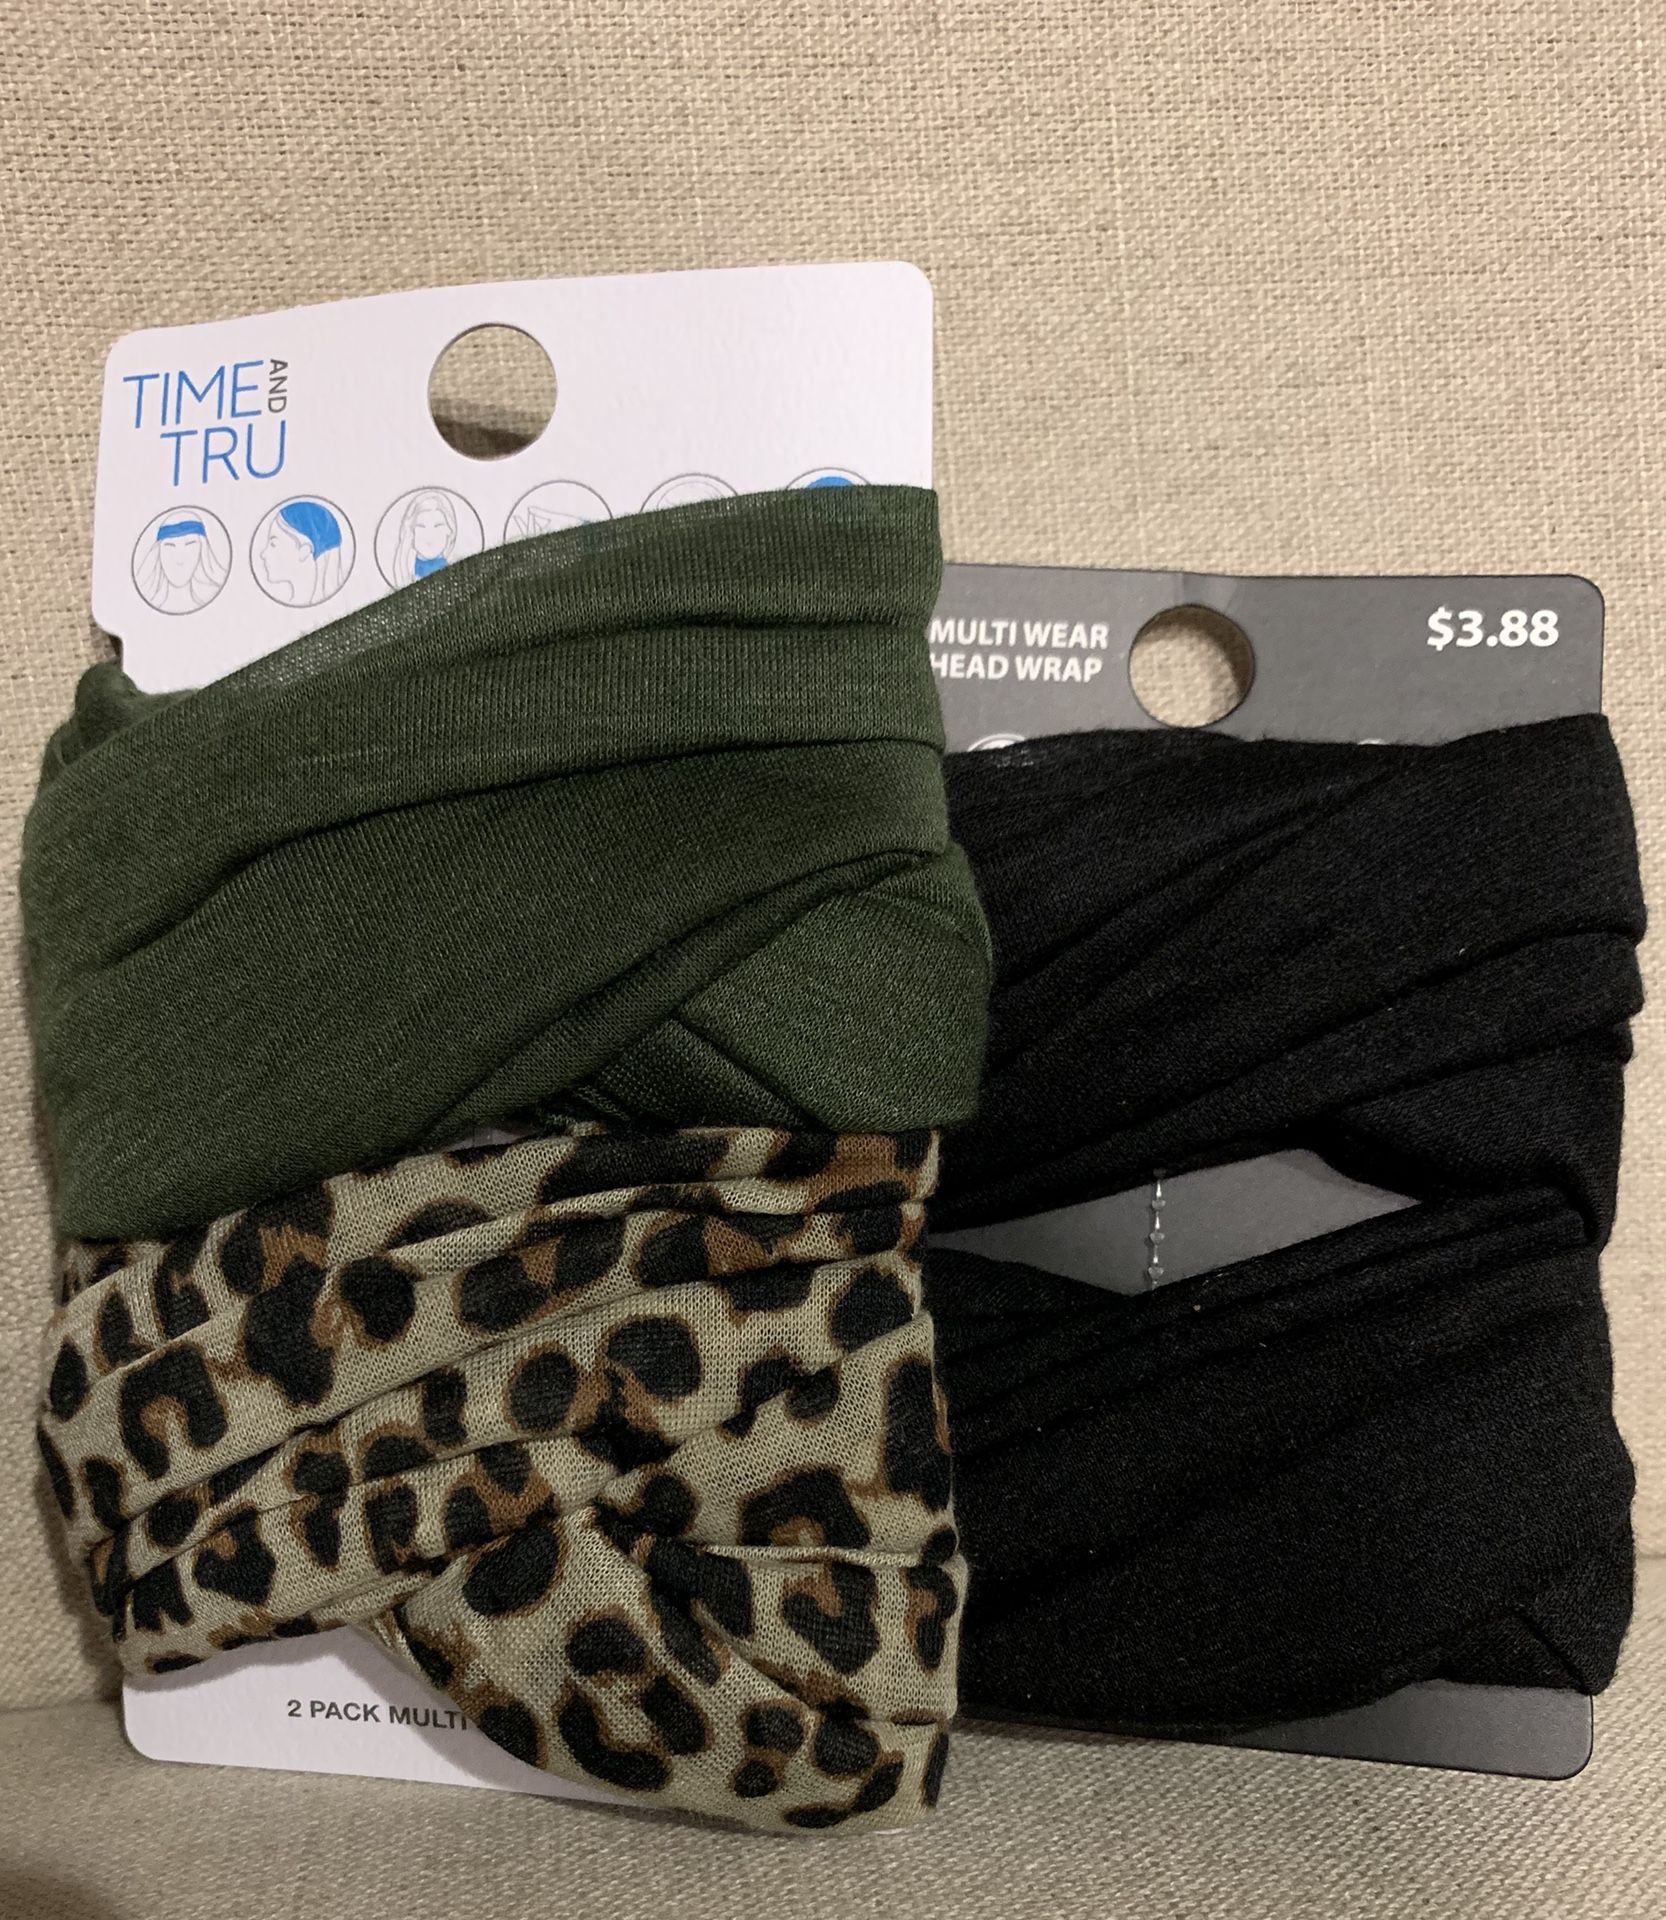 New-MULTIWEAR Head Wraps/Colors-Olive & Leopard/Black “ Can Be Worn As a Mask” Lightweight Breathable, UNISEX